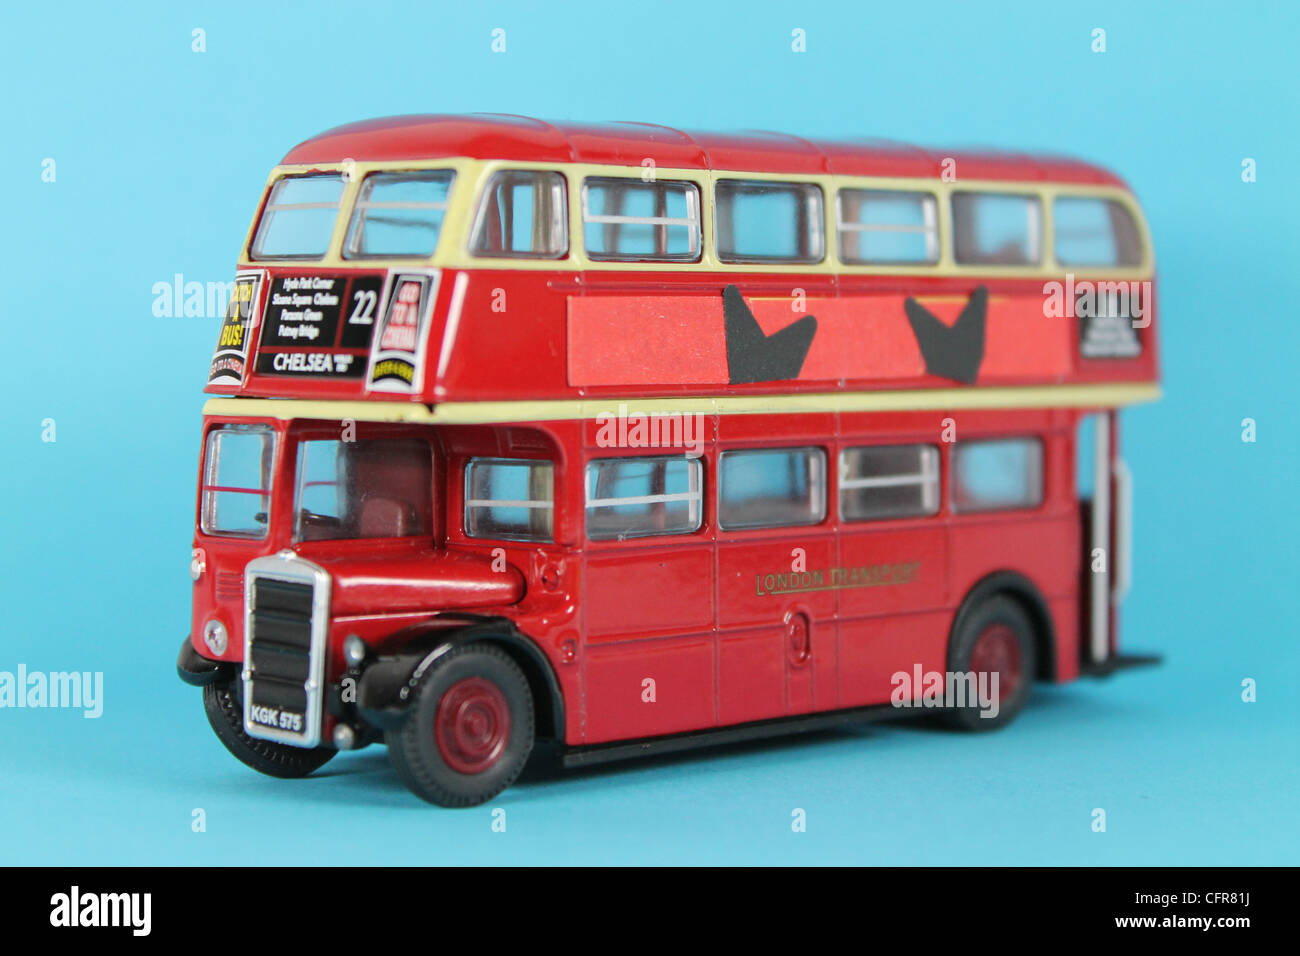 Red London Bus, Stock Photo